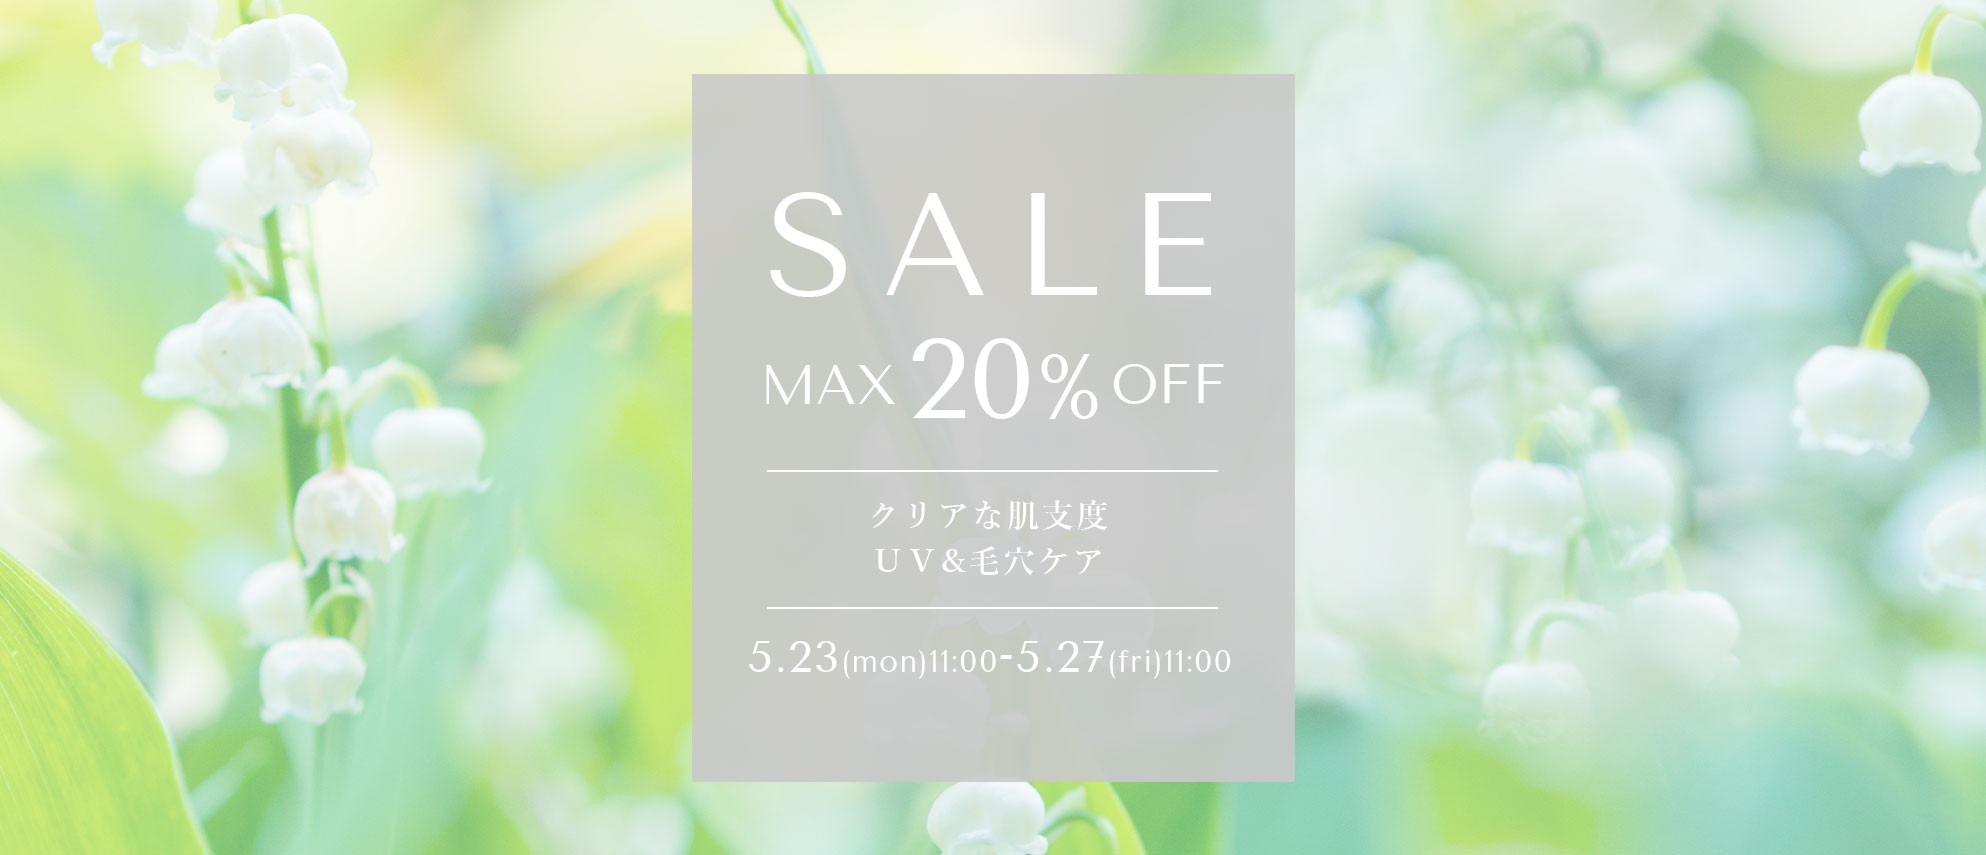 MAX20%OFF & CLAY10％OFF SALE 5.23-5.27